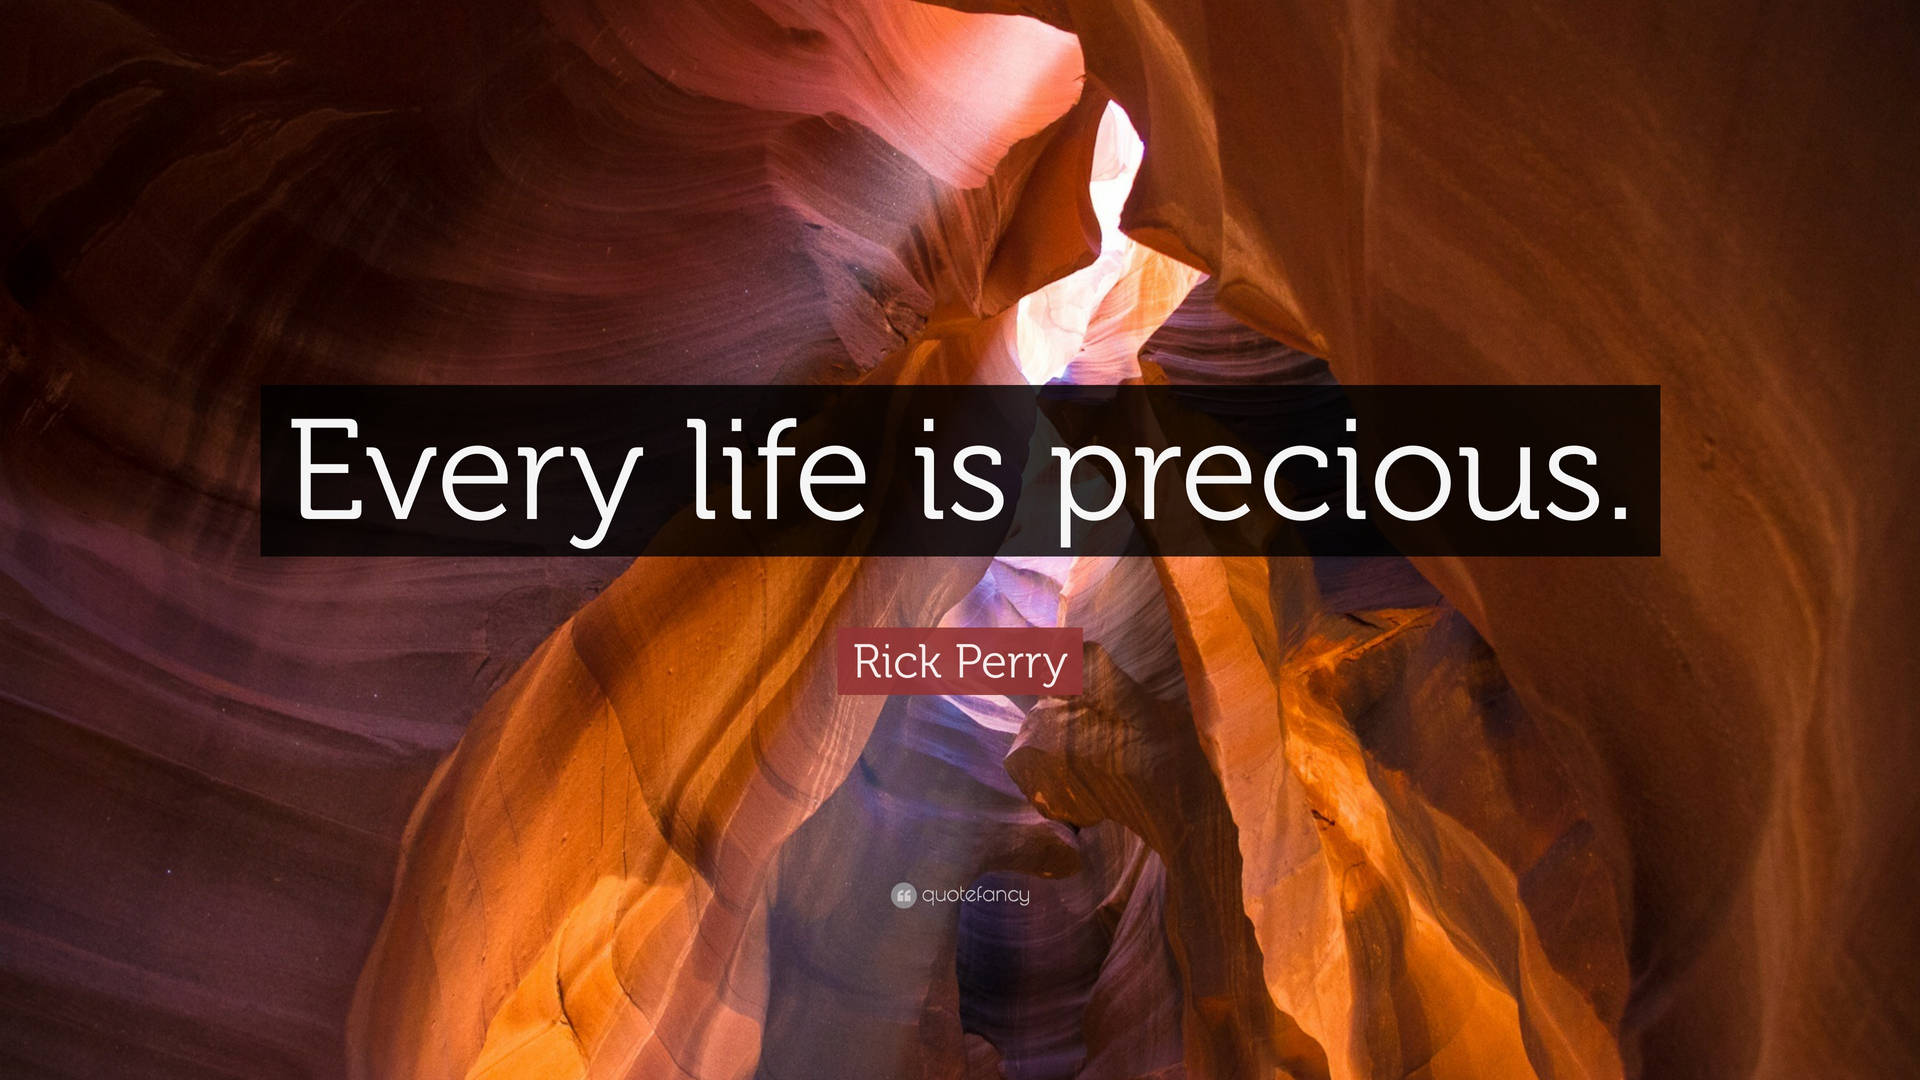 Quote About Precious Life By Rick Perry Wallpaper